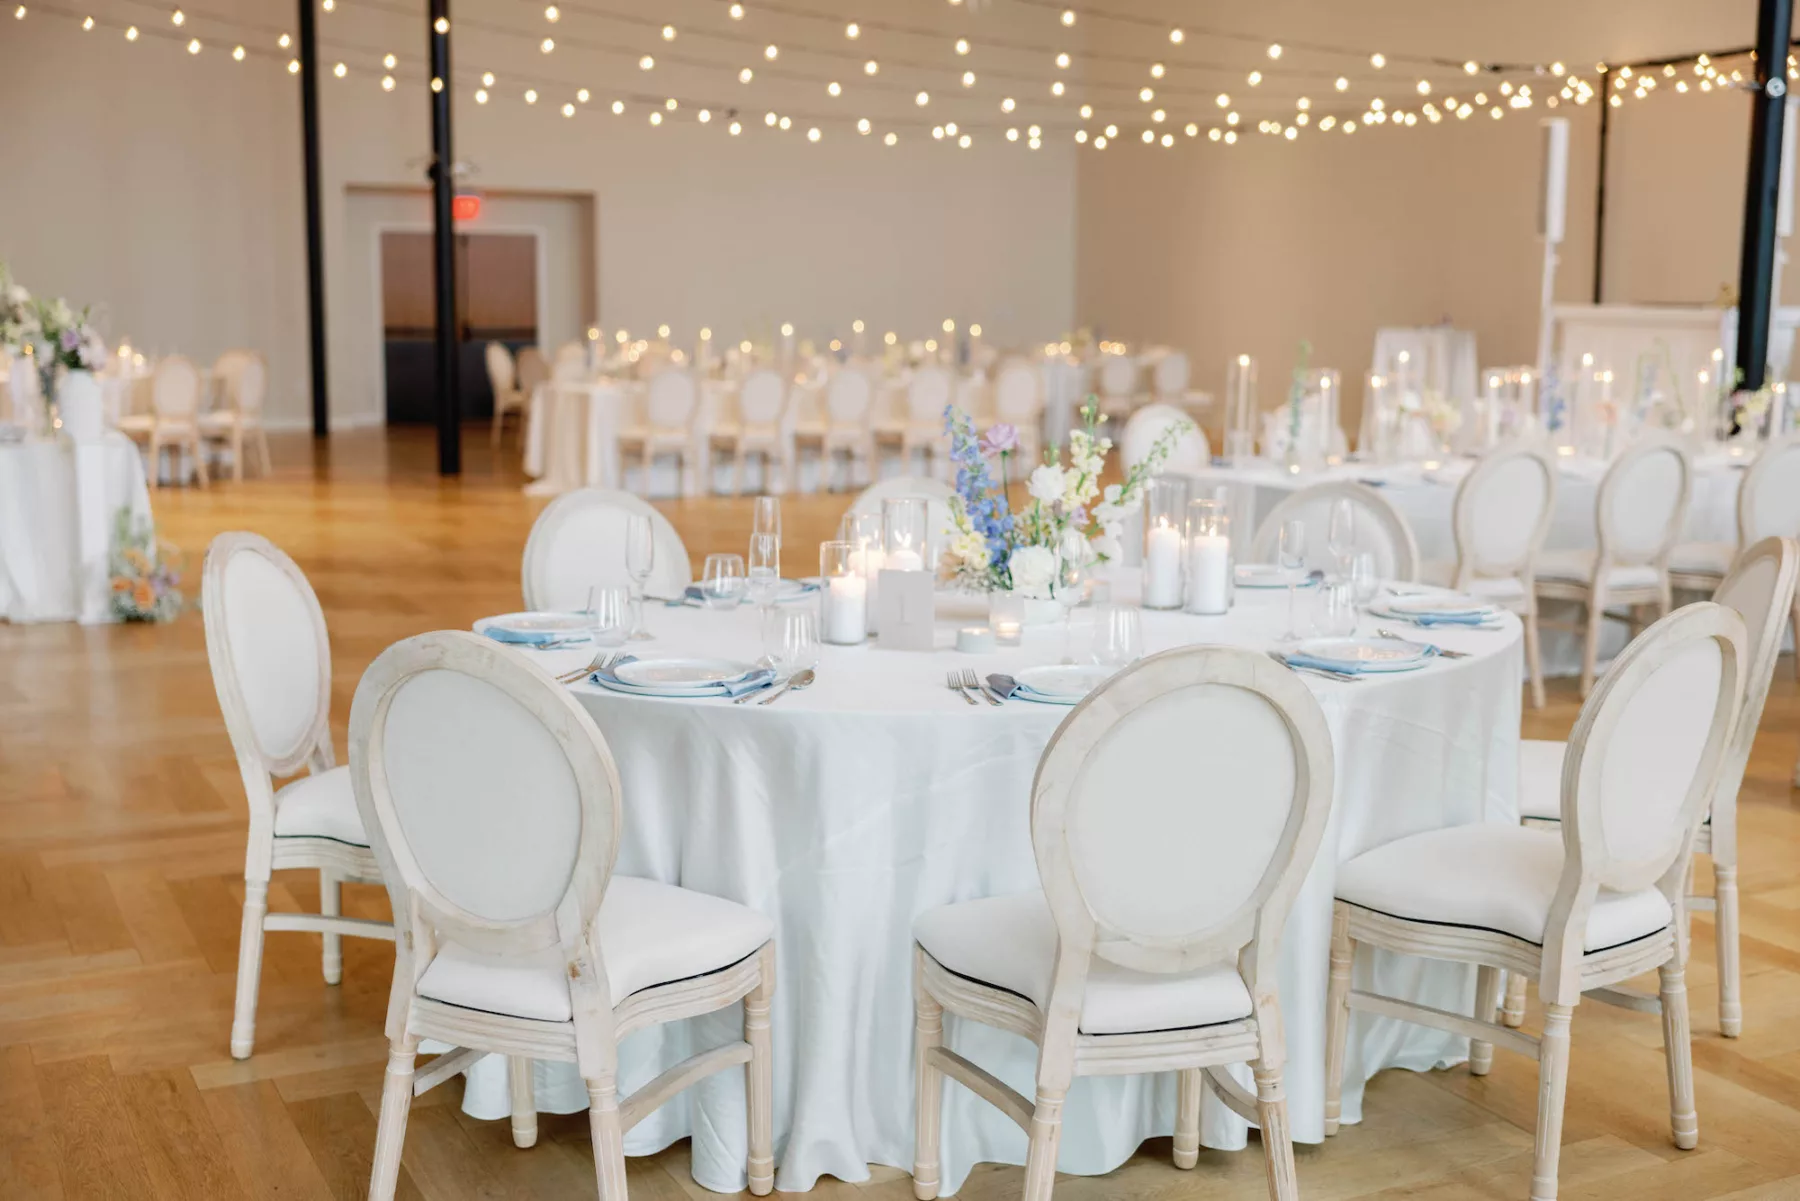 Whimsical White and Blue Wedding Reception Inspiration | Tampa Bay Event Planner The Olive Tree Weddings